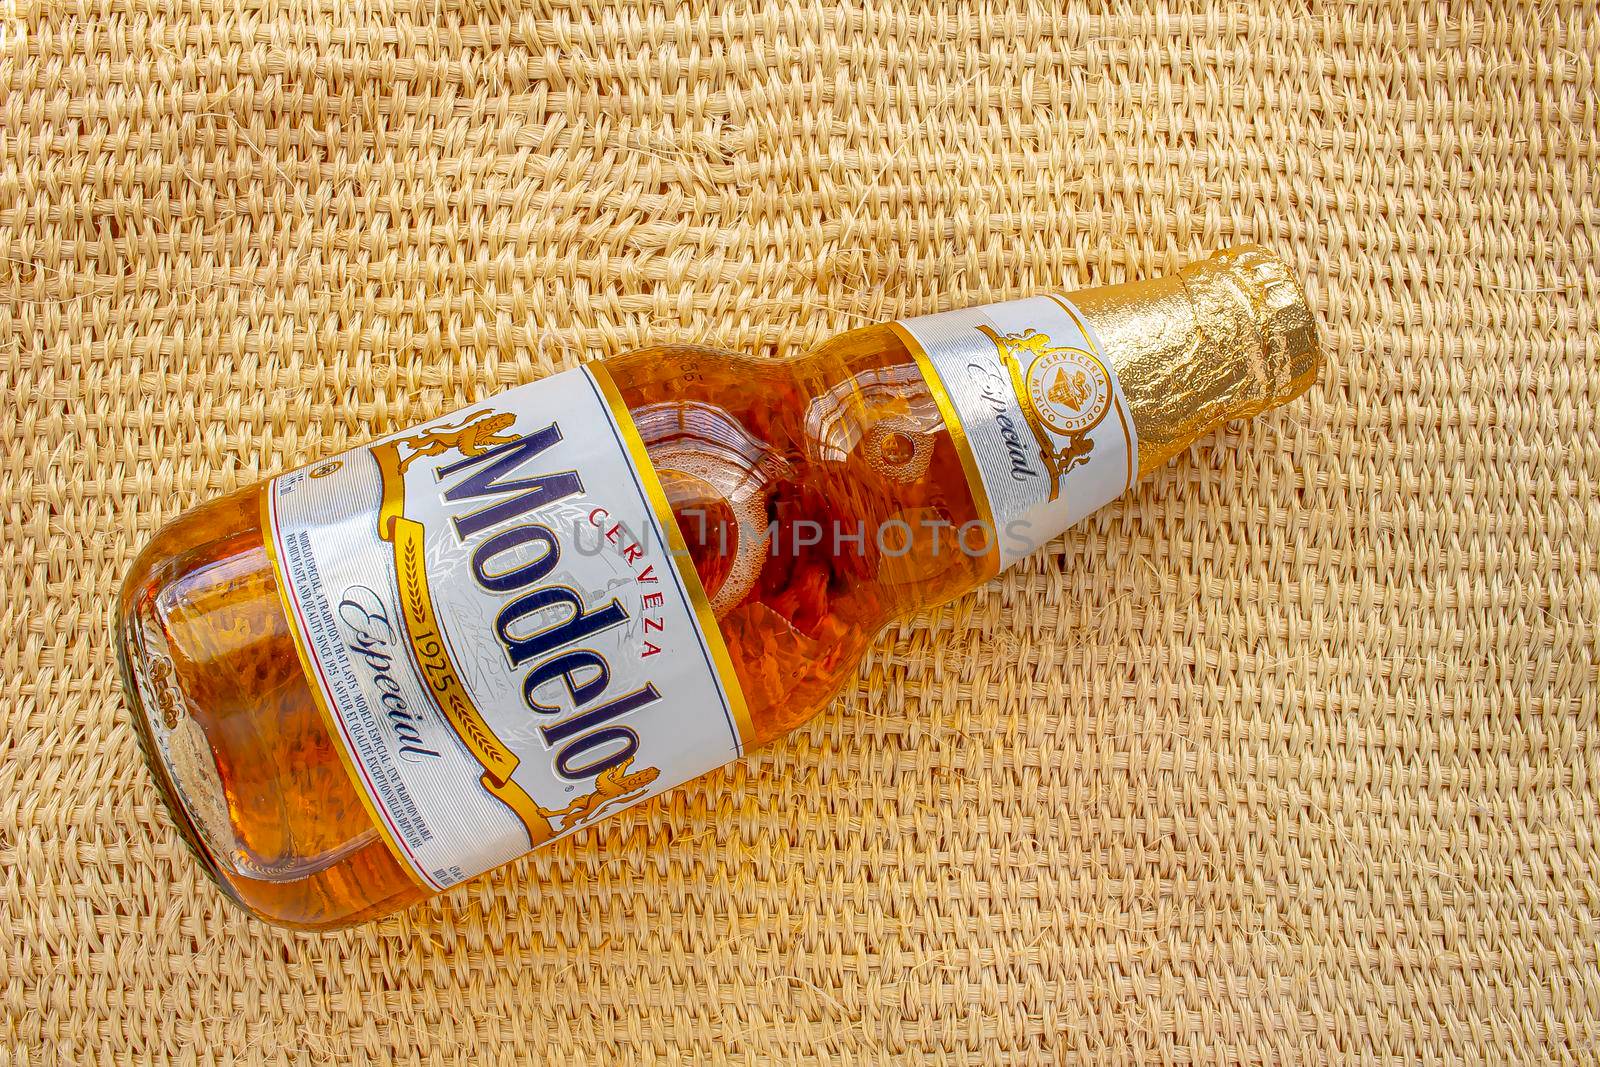 Calgary, Alberta, Canada. May 1, 2020. Modelo Especial beer bottle clear bright yellow colour on a on a straw rural bag background texture